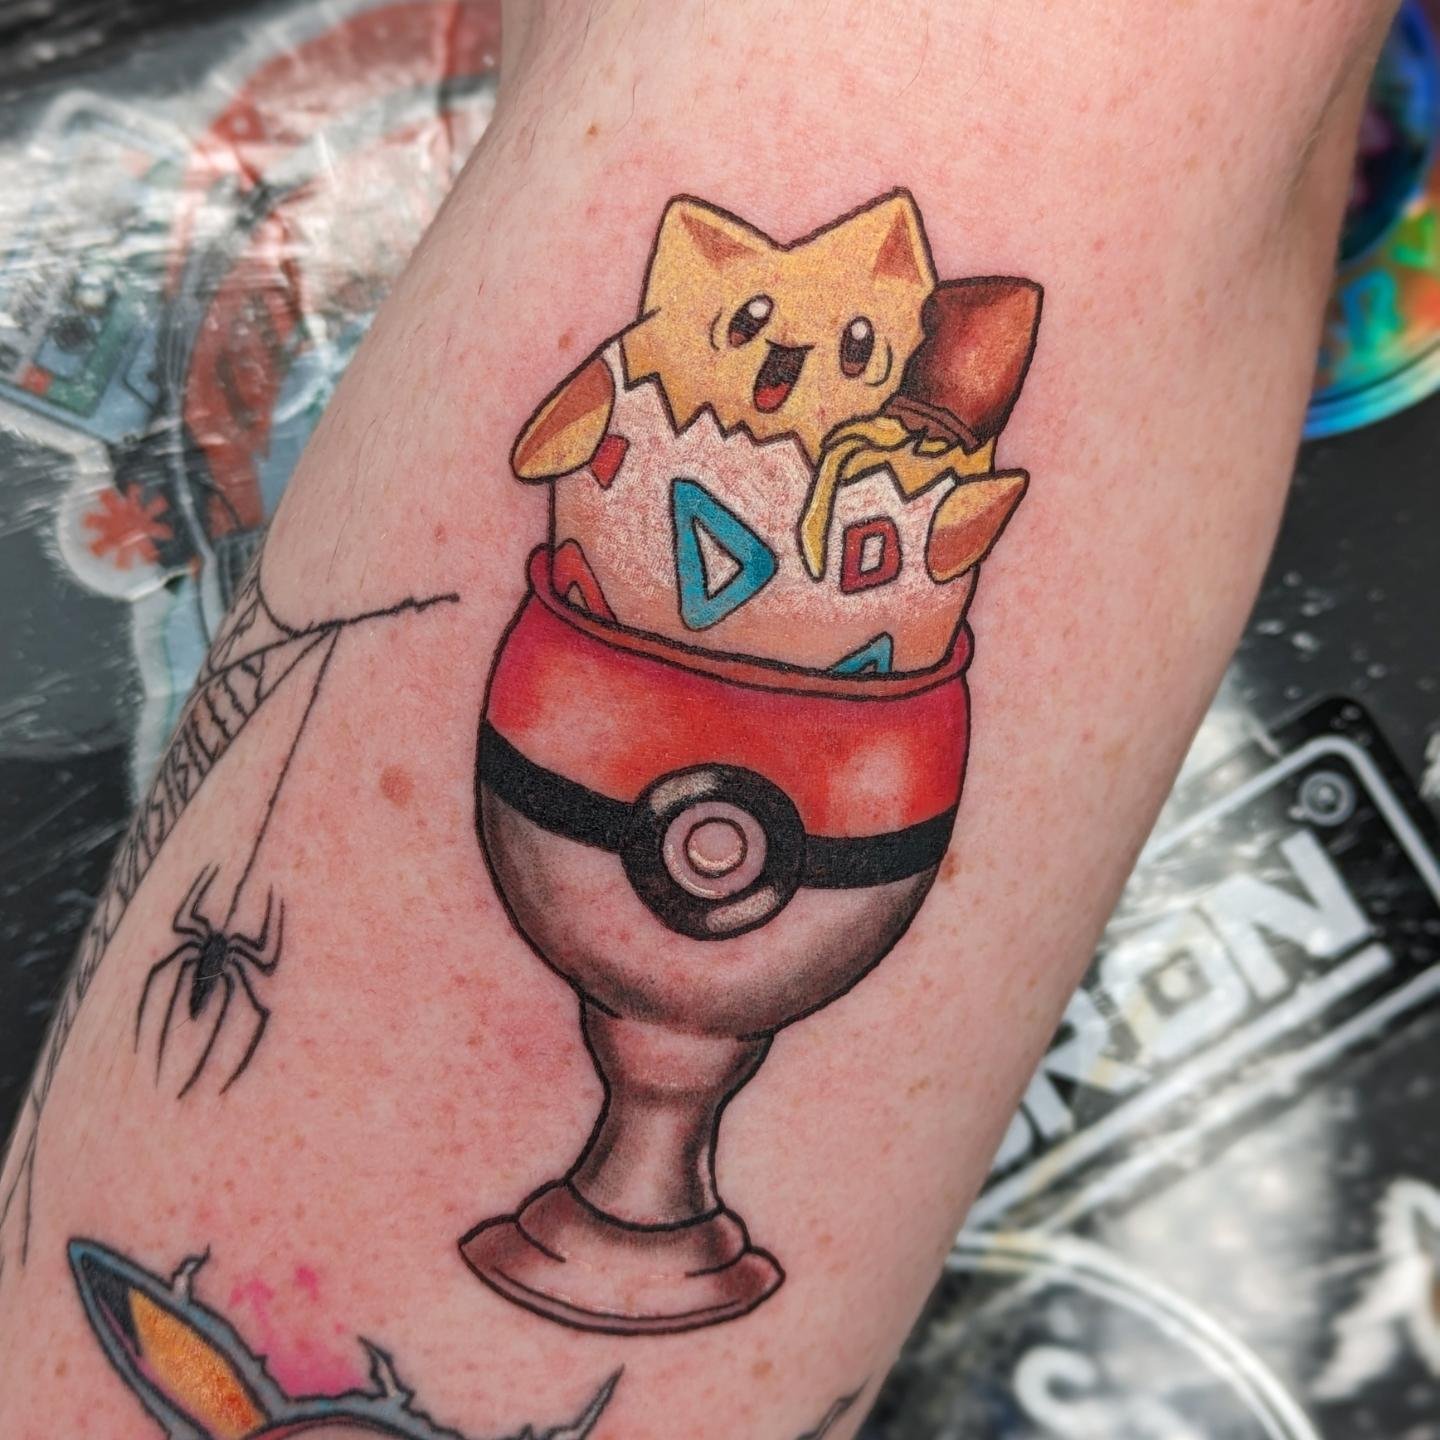 Callum's Pok&eacute;mon collection is growing!
Cracked egg head Togepi sat in his Pokeball eggcup added today 😍😍

Pikachu is almost 1 month healed. Just needed a couple small touch ups in the yellow but settling in lovely!

Thanks so much for alway